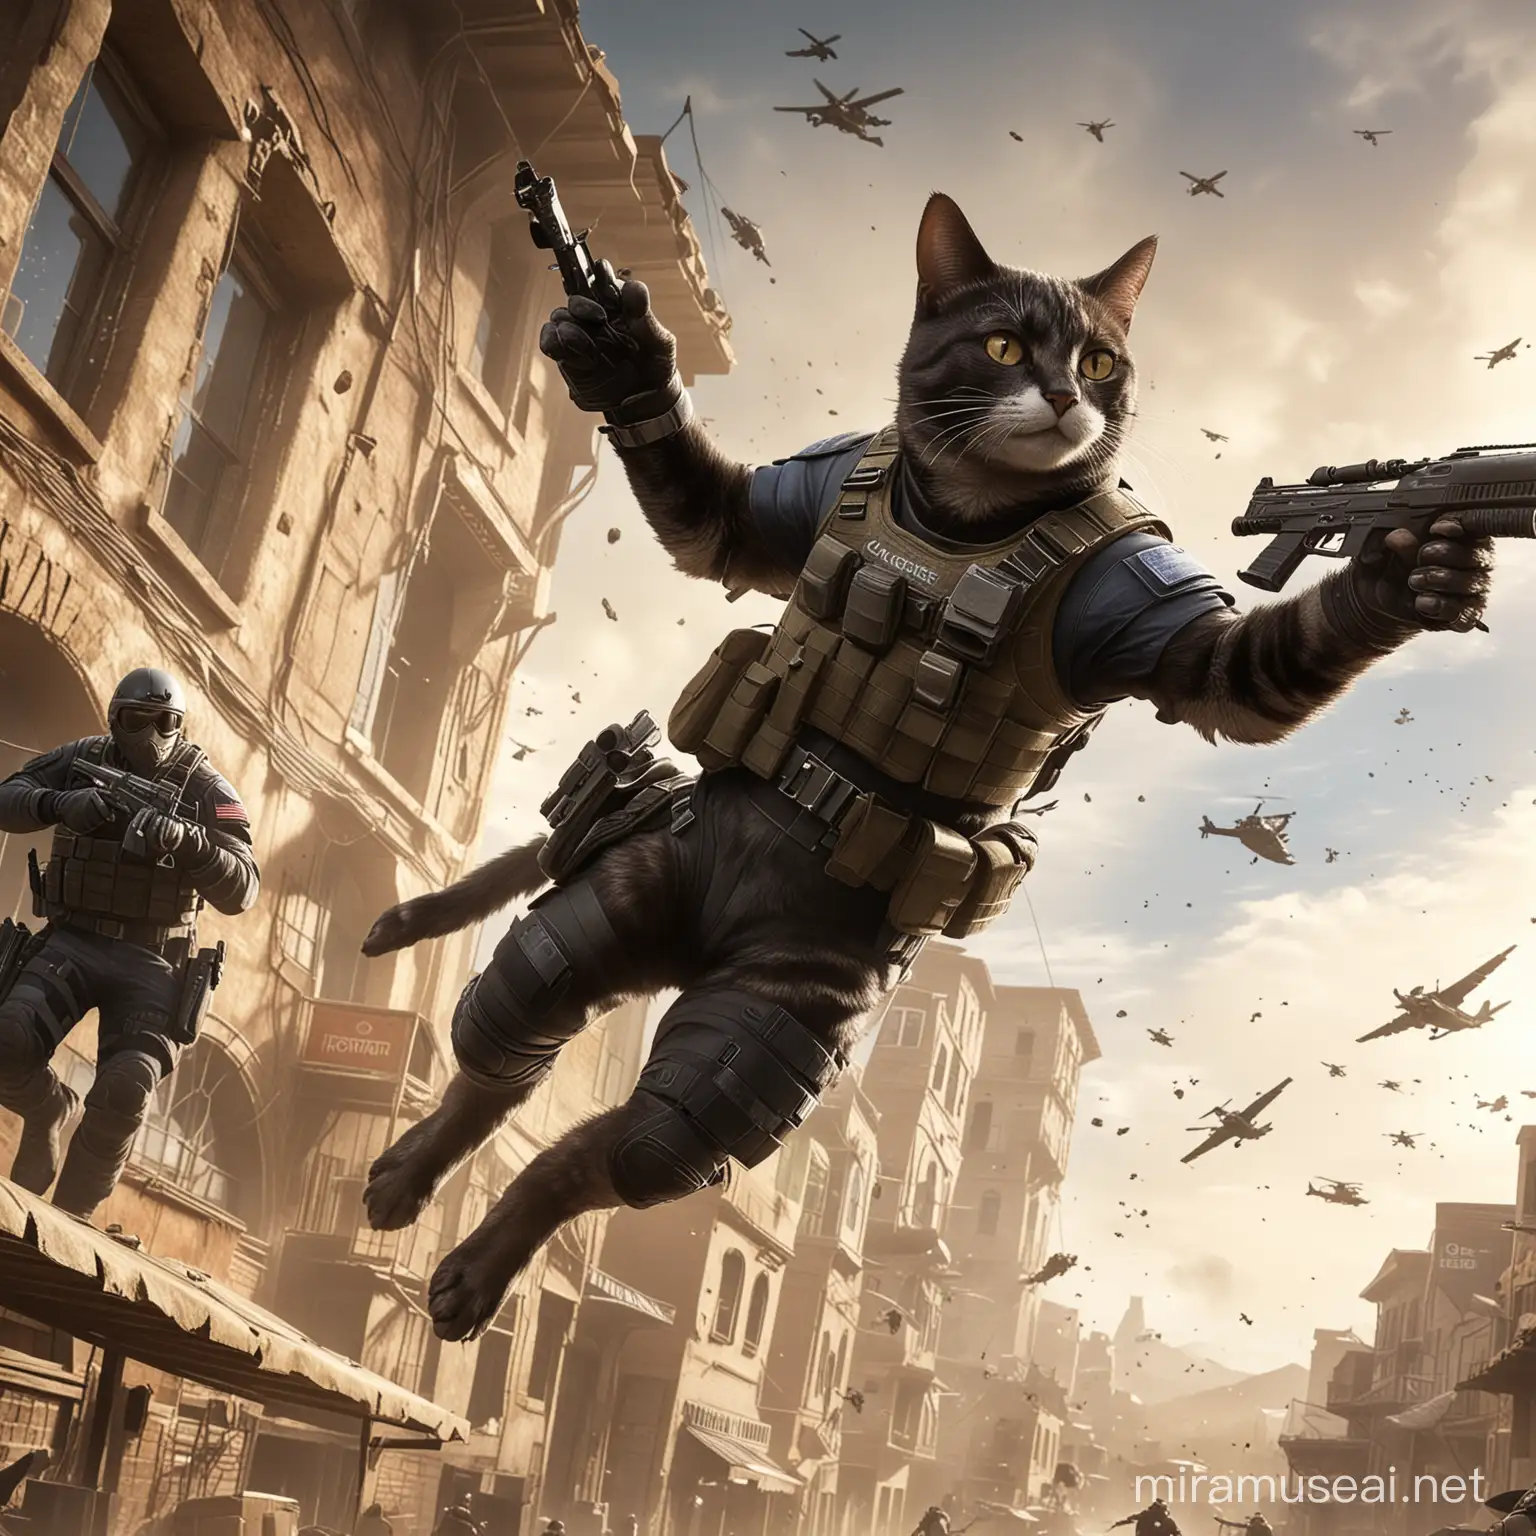 Playful Cat Flying in Tom Clancys Rainbow Six Siege Environment